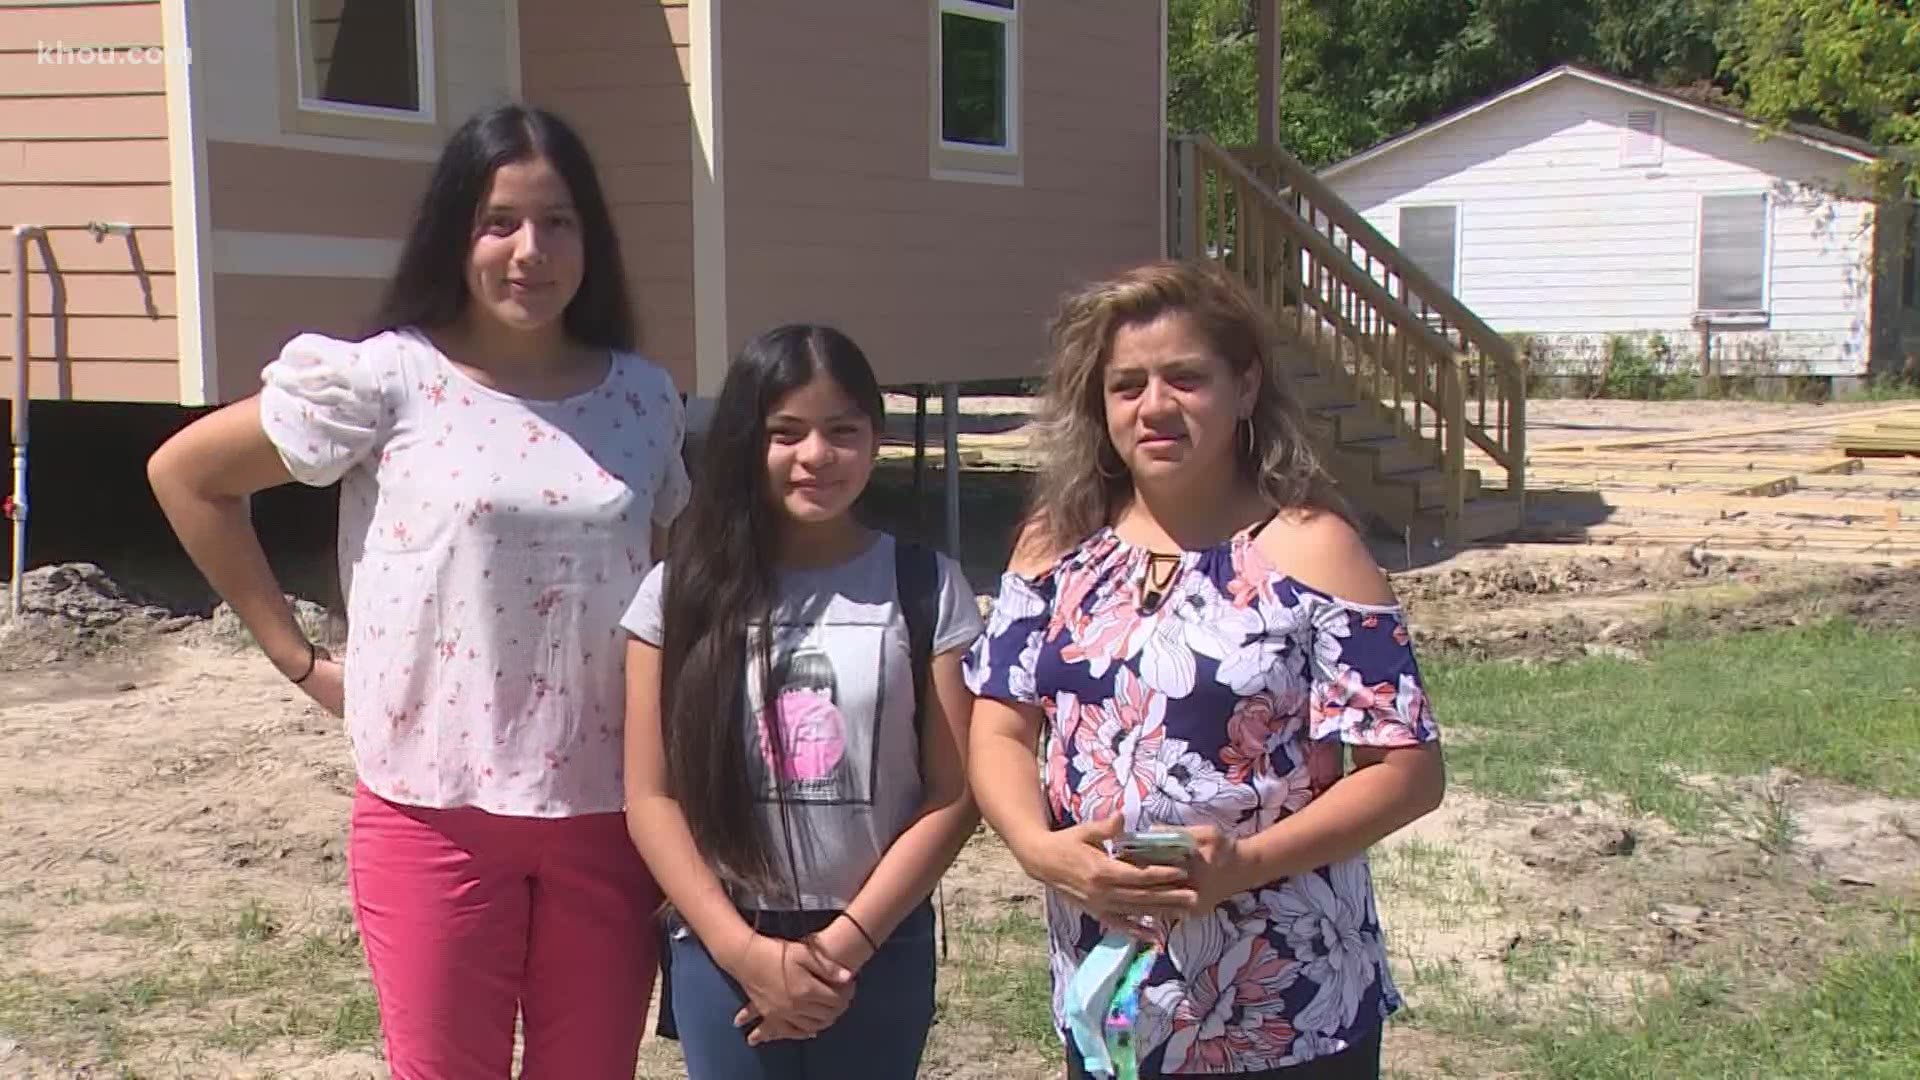 Betzabe Gomez, who asked Santa for a new home after hers was damaged during Hurricane Harvey, will soon move into a new home with her family.